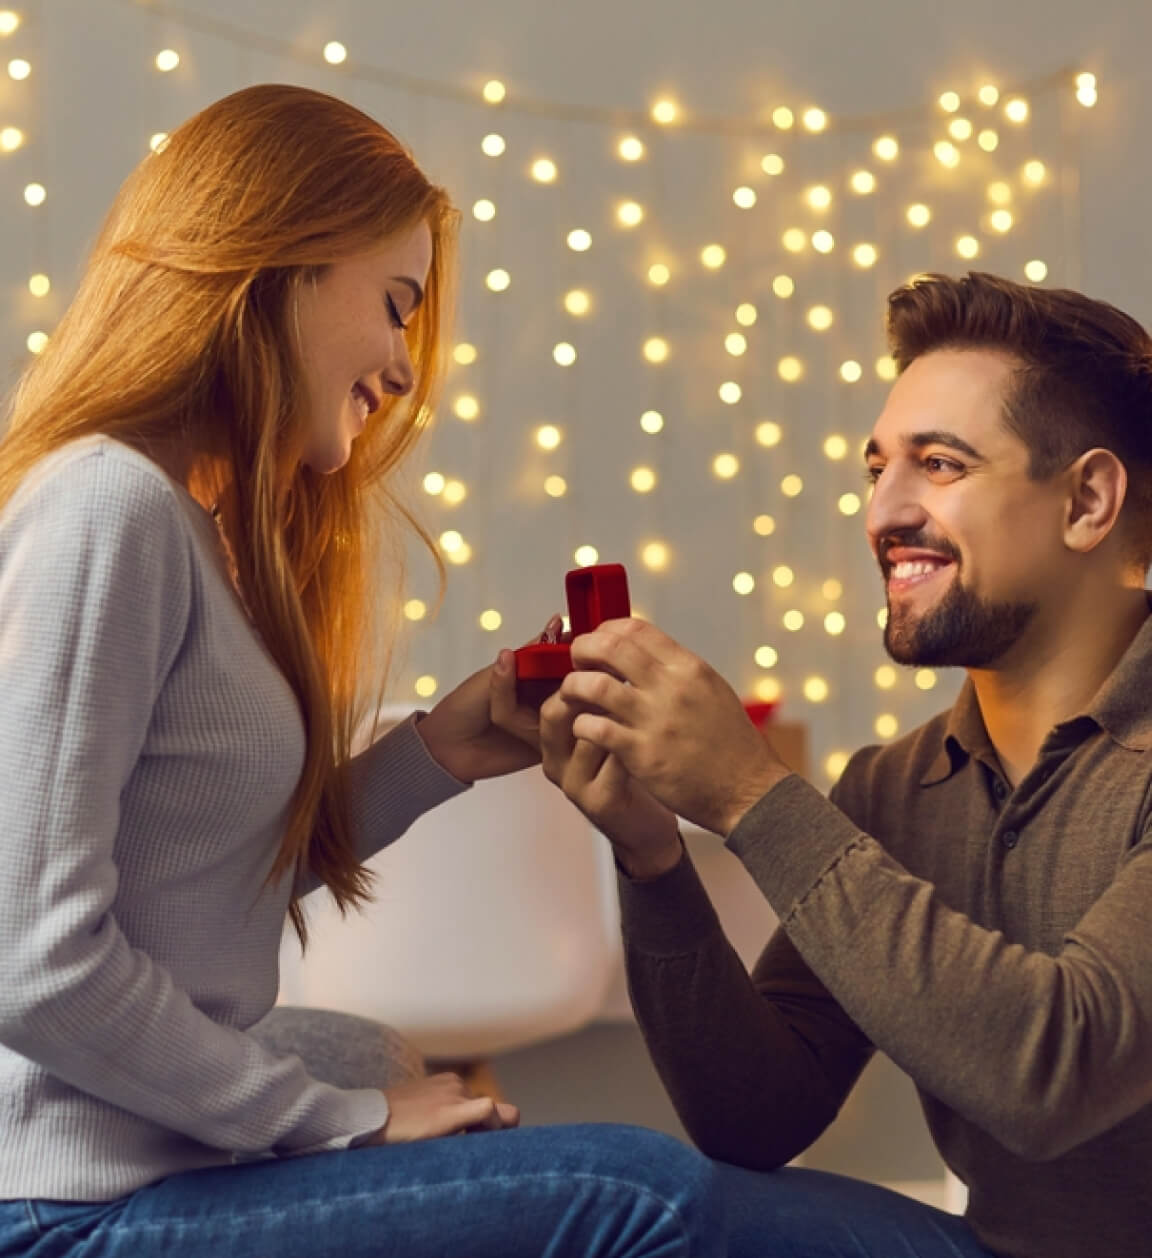 Impress Your Crush and Confess Your Love with Valentine’s Day Gift Ideas